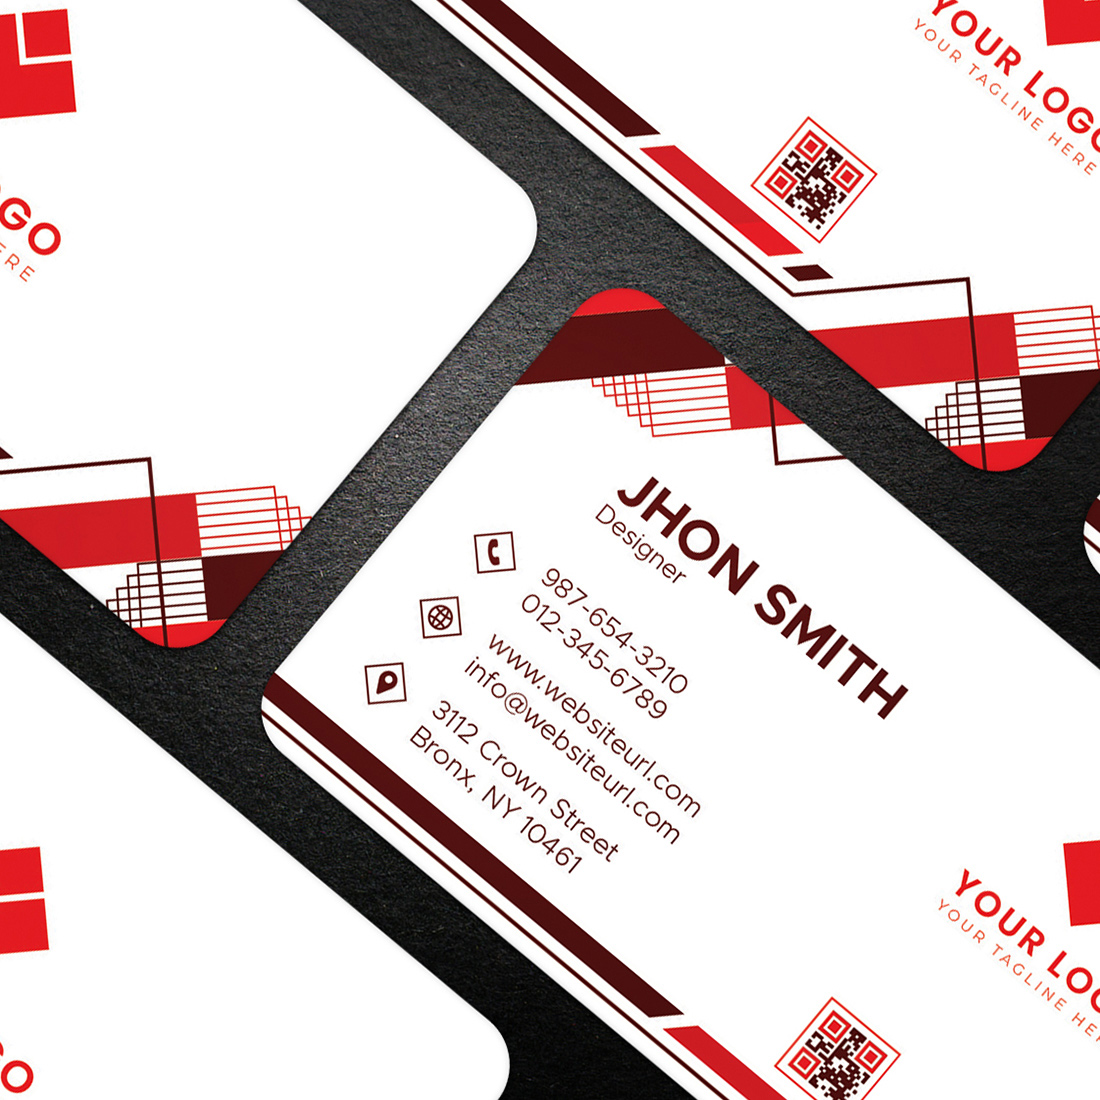 Clean Business Card Template cover image.